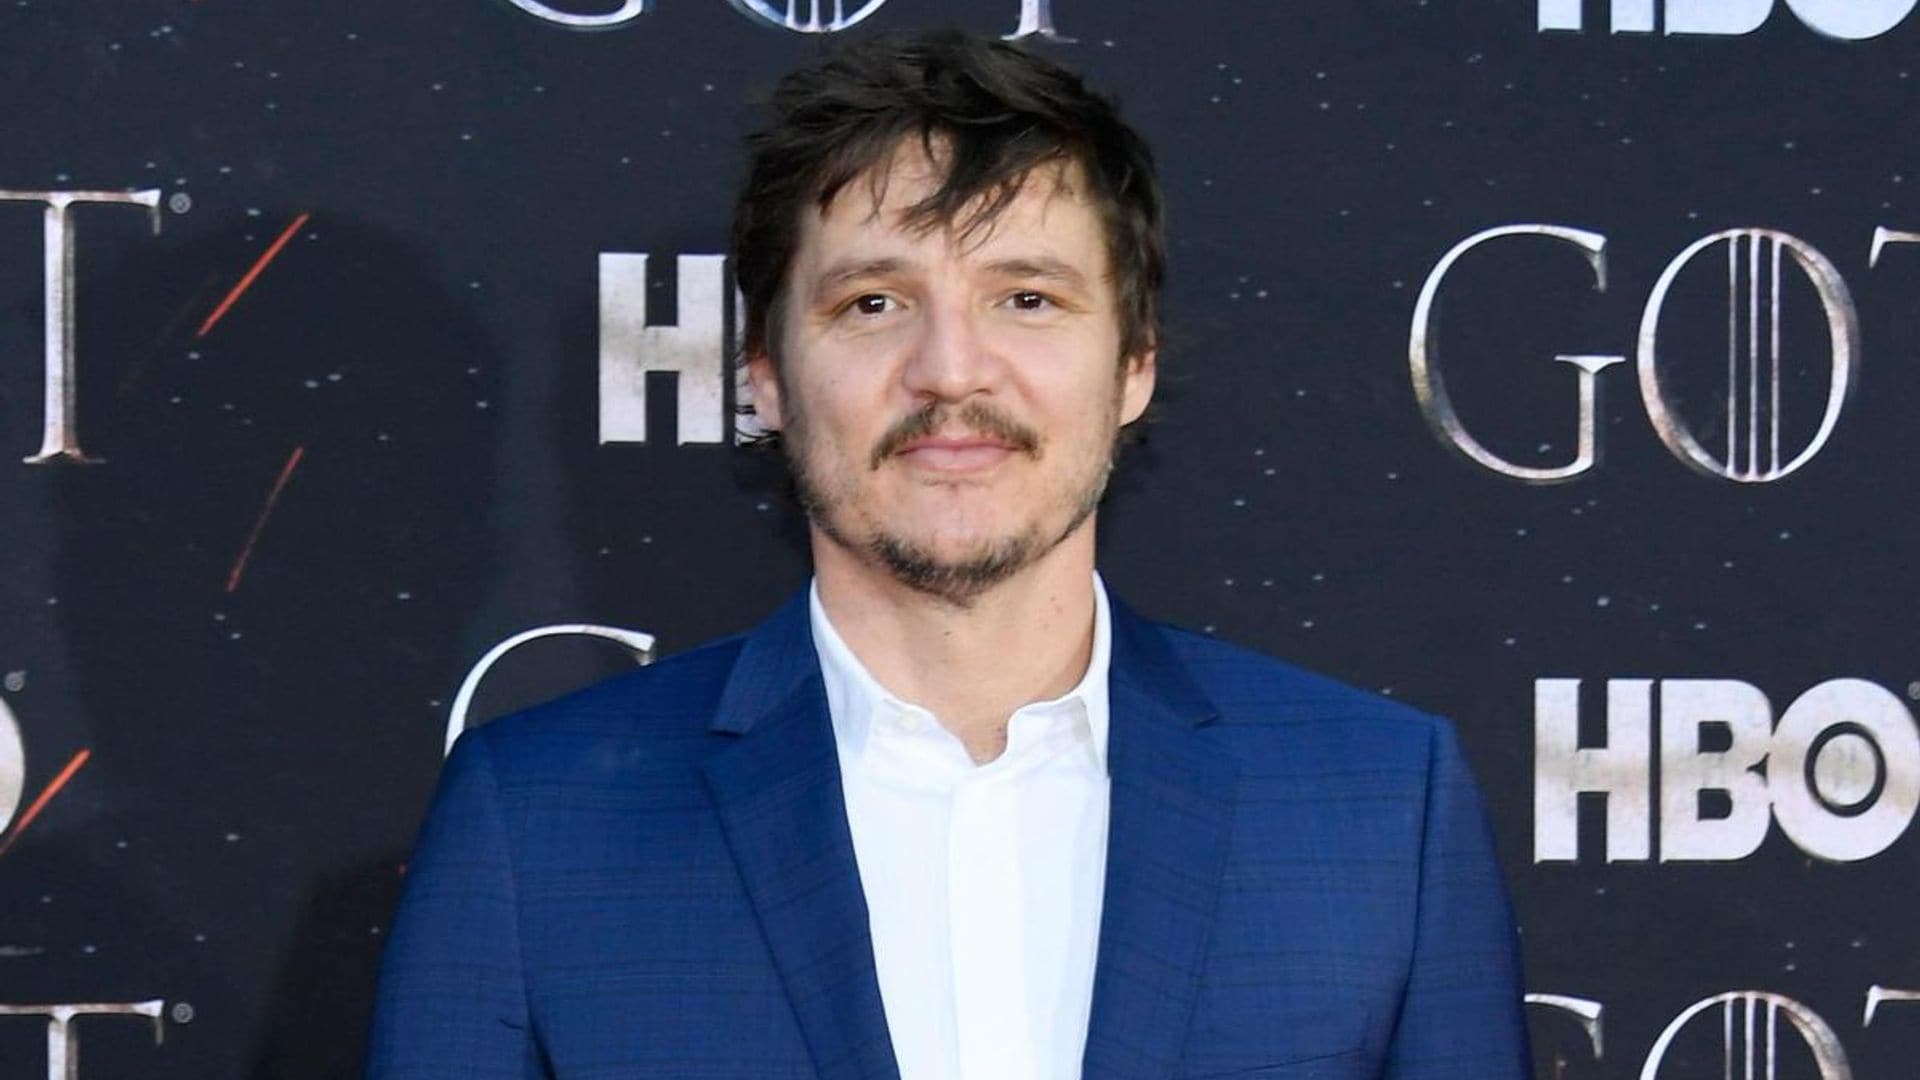 Pedro Pascal reveals he got an infection from fans taking selfies with their fingers in his eyes